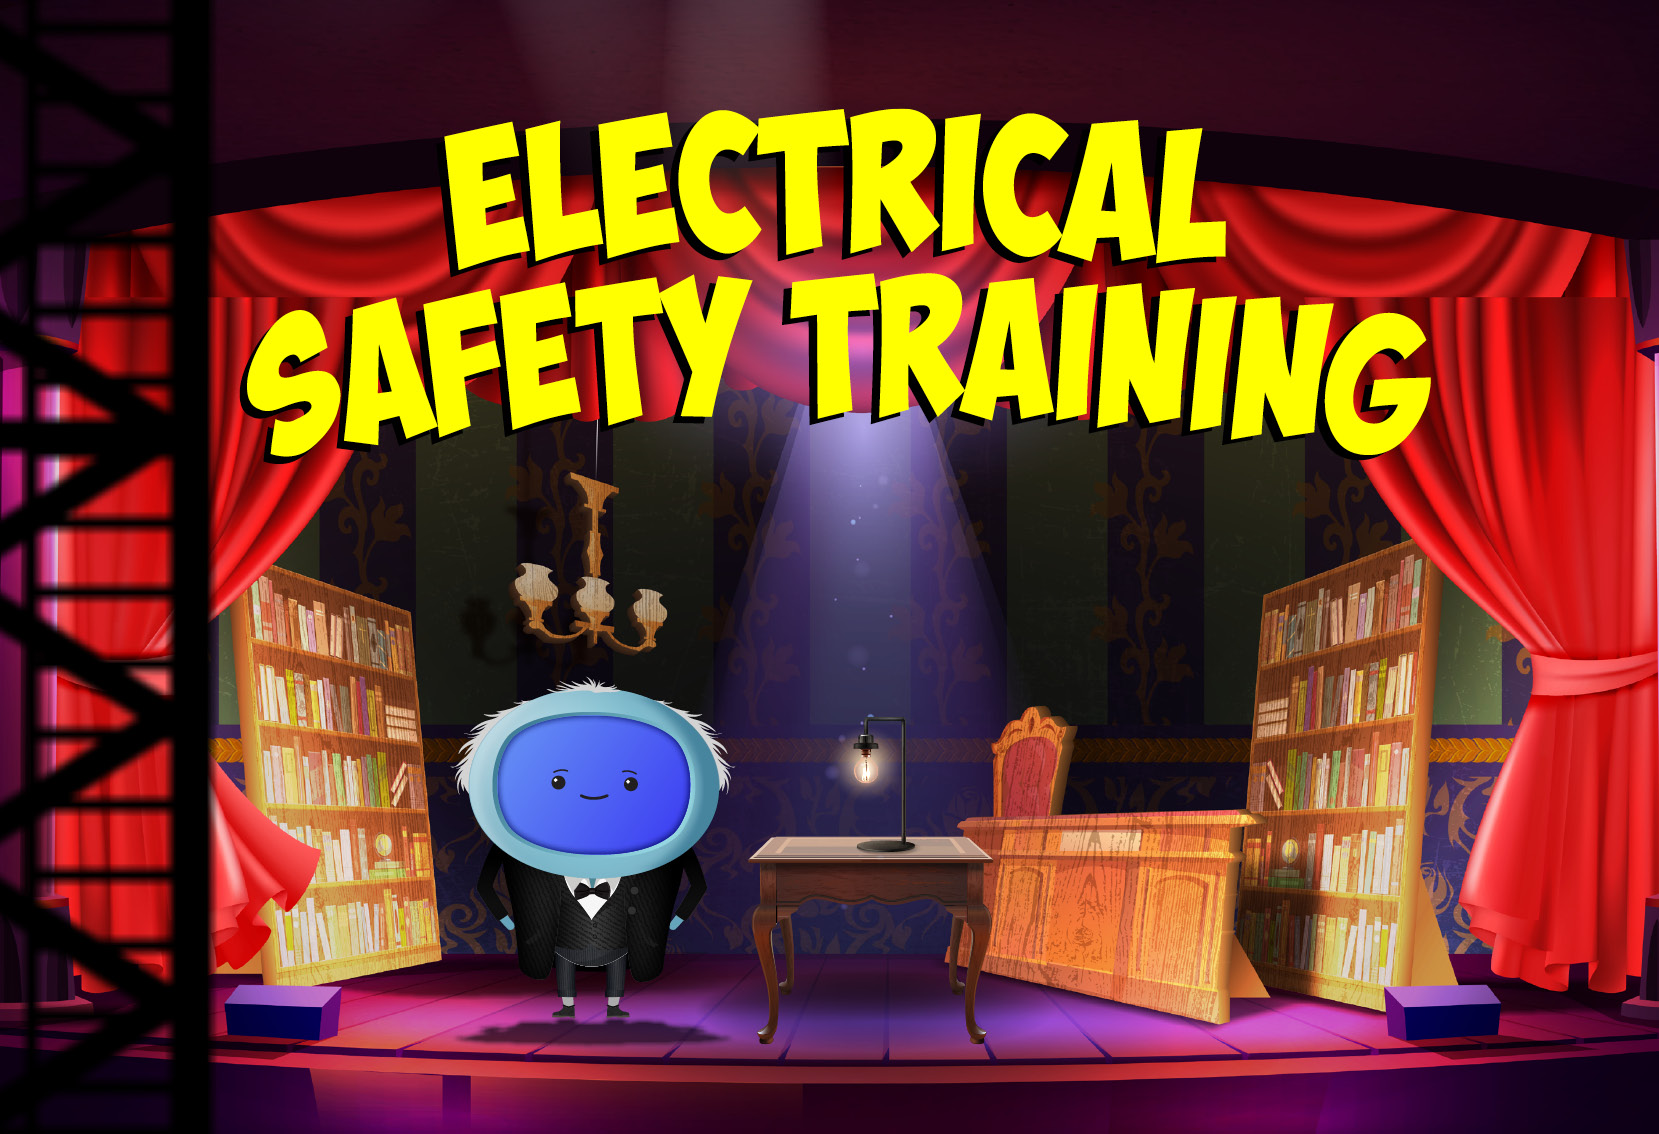 iAM 00083 - Electrical Safety Training - LMS Thumbnails-1